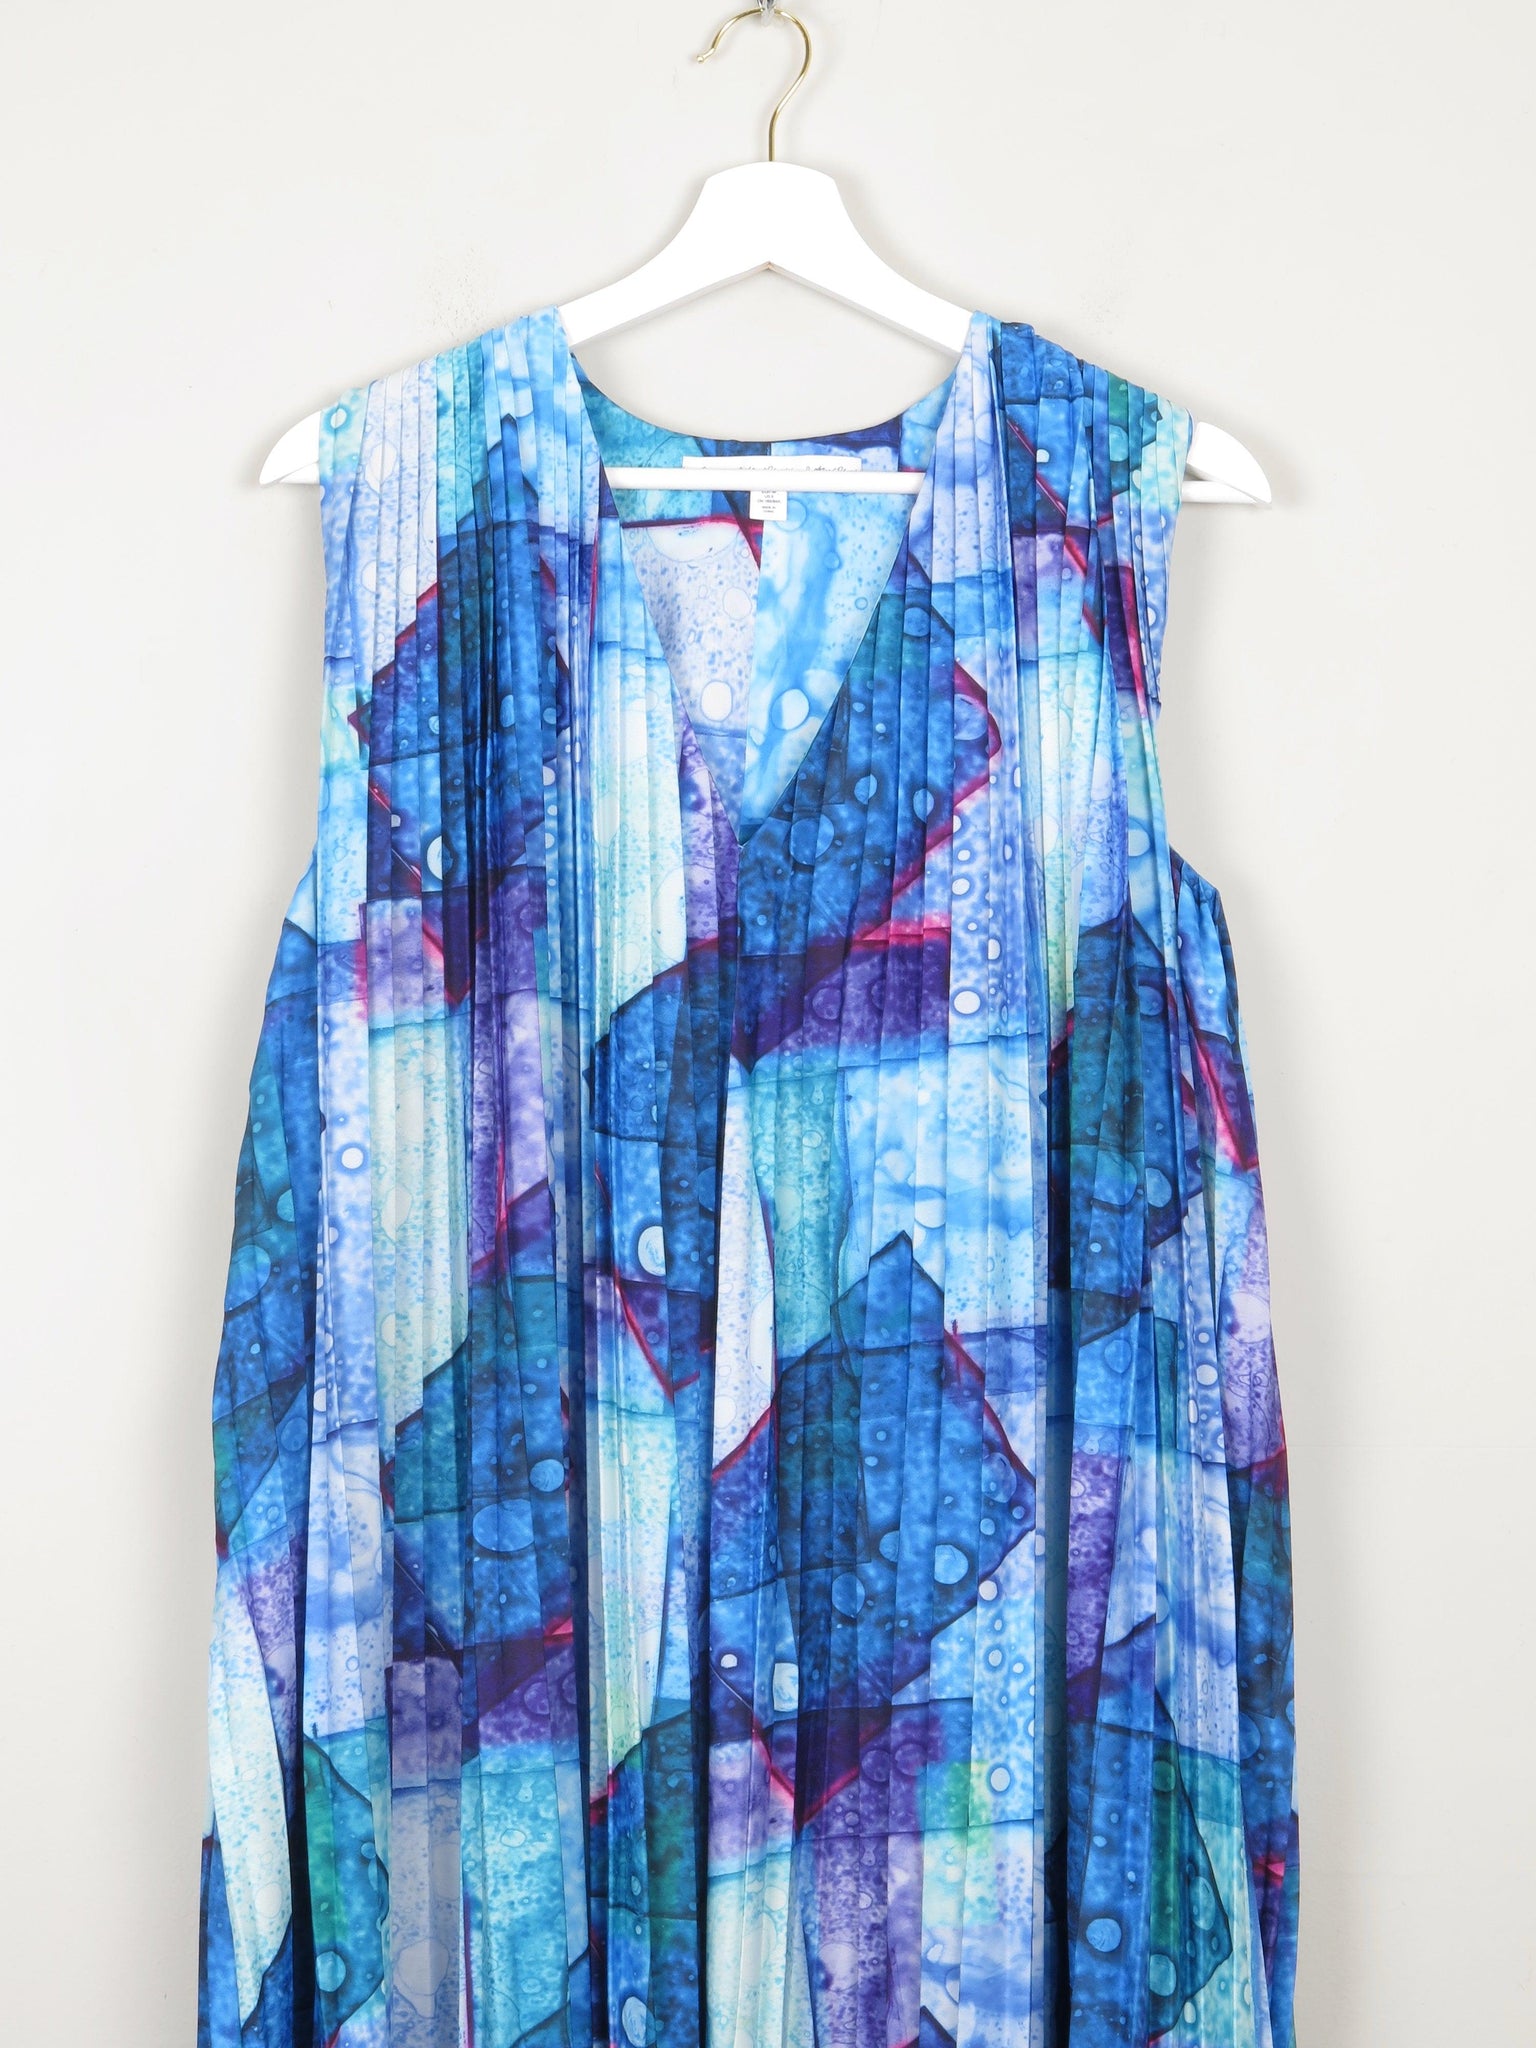 & Other Stories Blue & Purple Graphic Print Dress S - The Harlequin